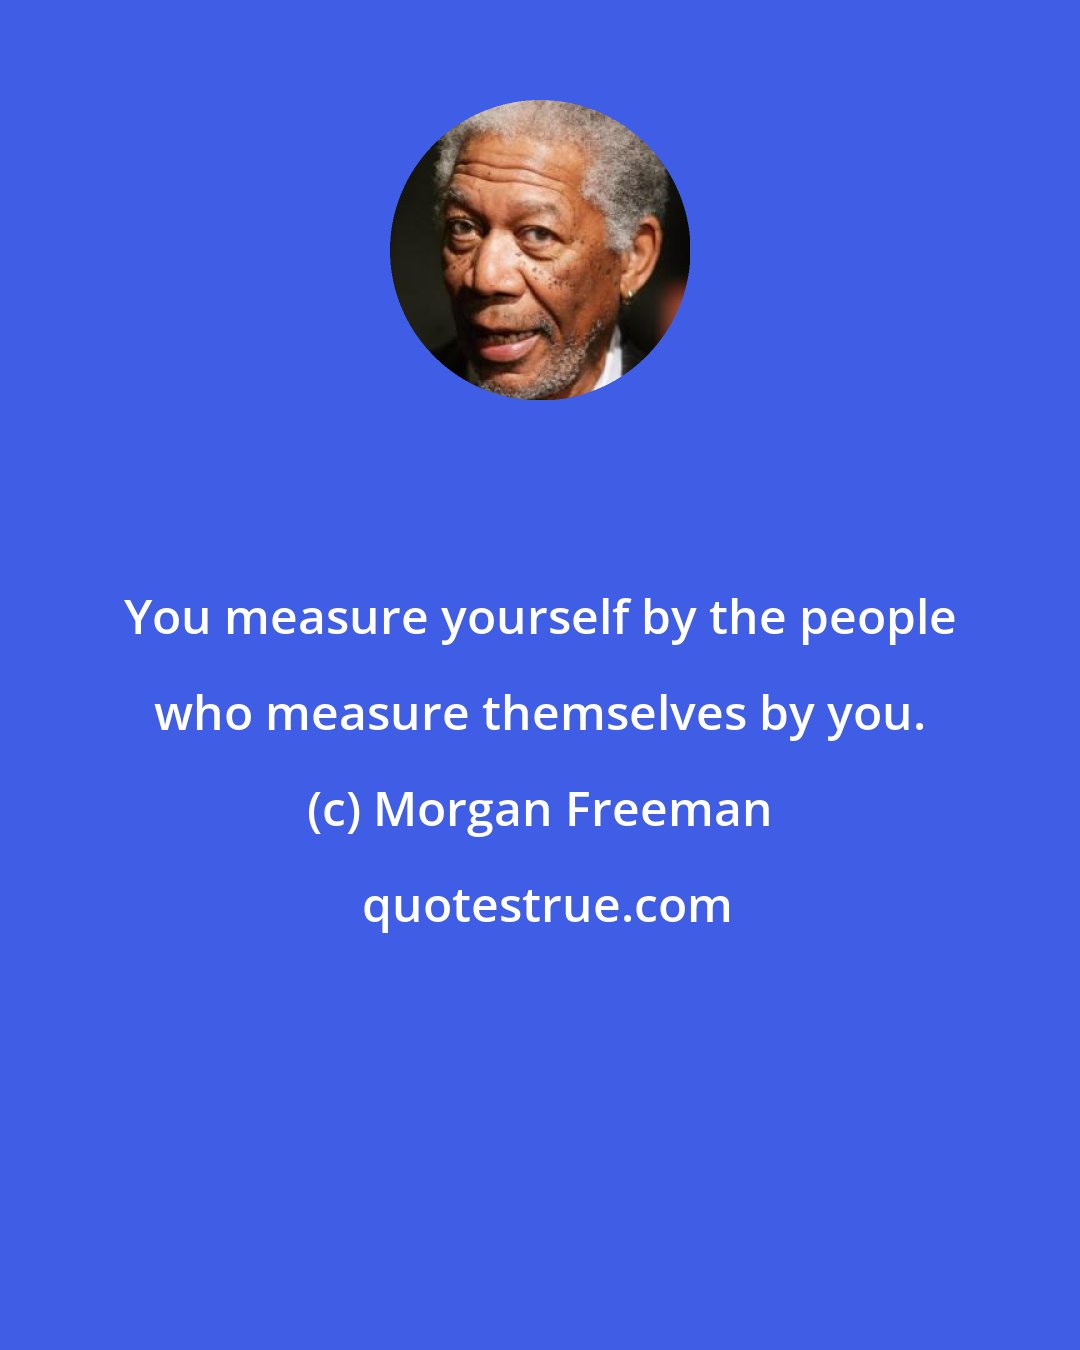 Morgan Freeman: You measure yourself by the people who measure themselves by you.